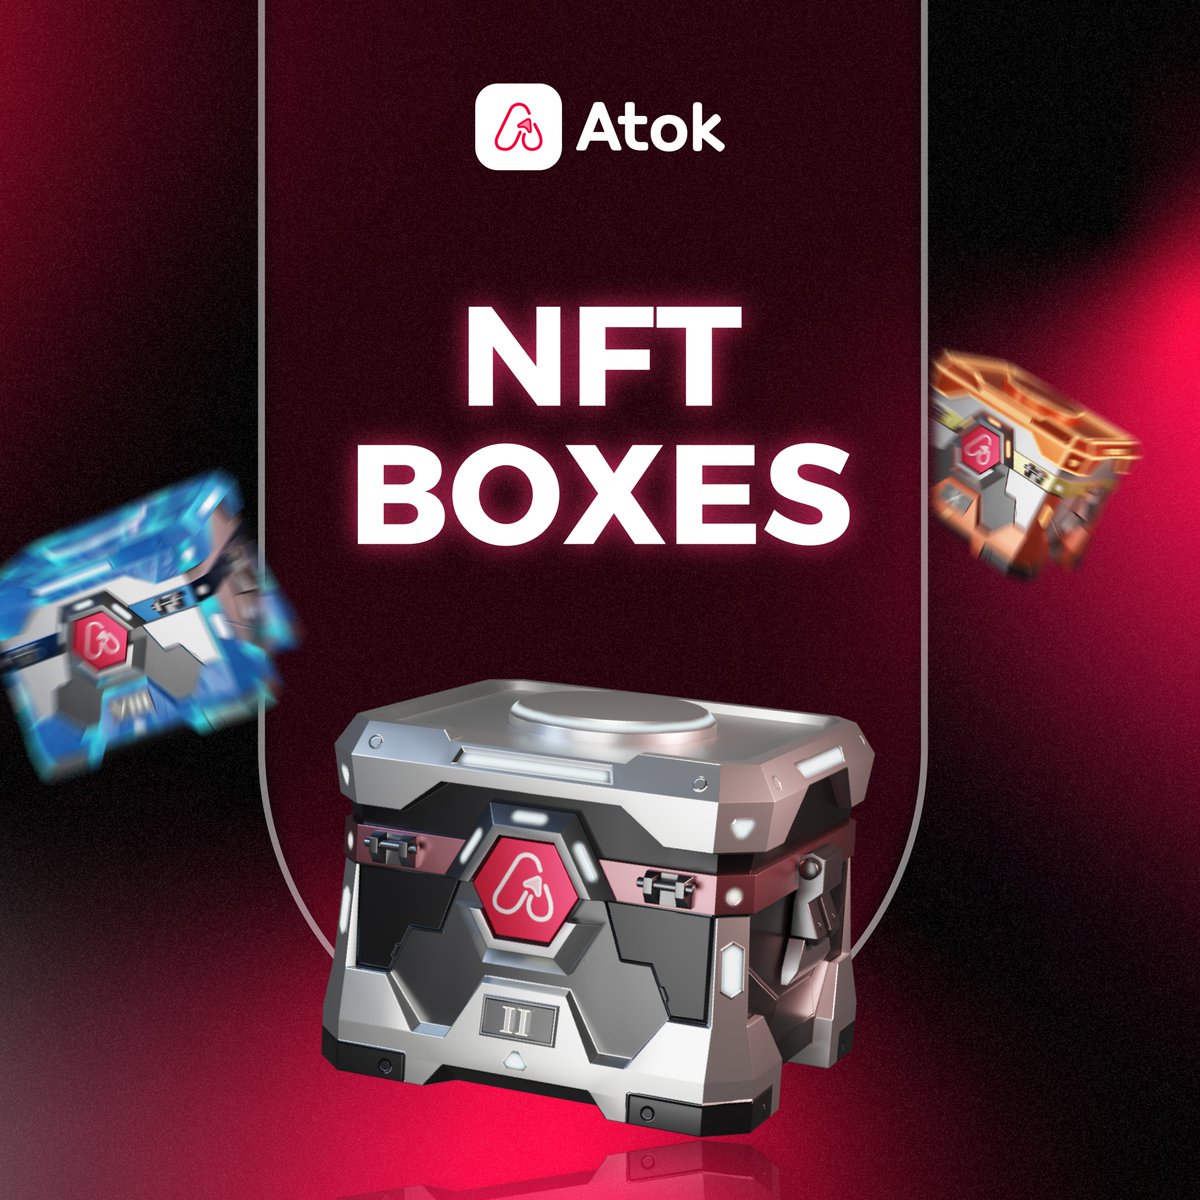 🤩🤩 Top #NFT Boxes that users cannot miss in the upcoming #2024 #Uptrend season ~~~ 🤩

Don't hold back, seize the opportunity! 🤑

⚡ Own an NFT Box today to increase your potential for future profits: atok.io

#Atok #DTE_Ventures #NFTBox #NFT #NFTPreSale #M2E…